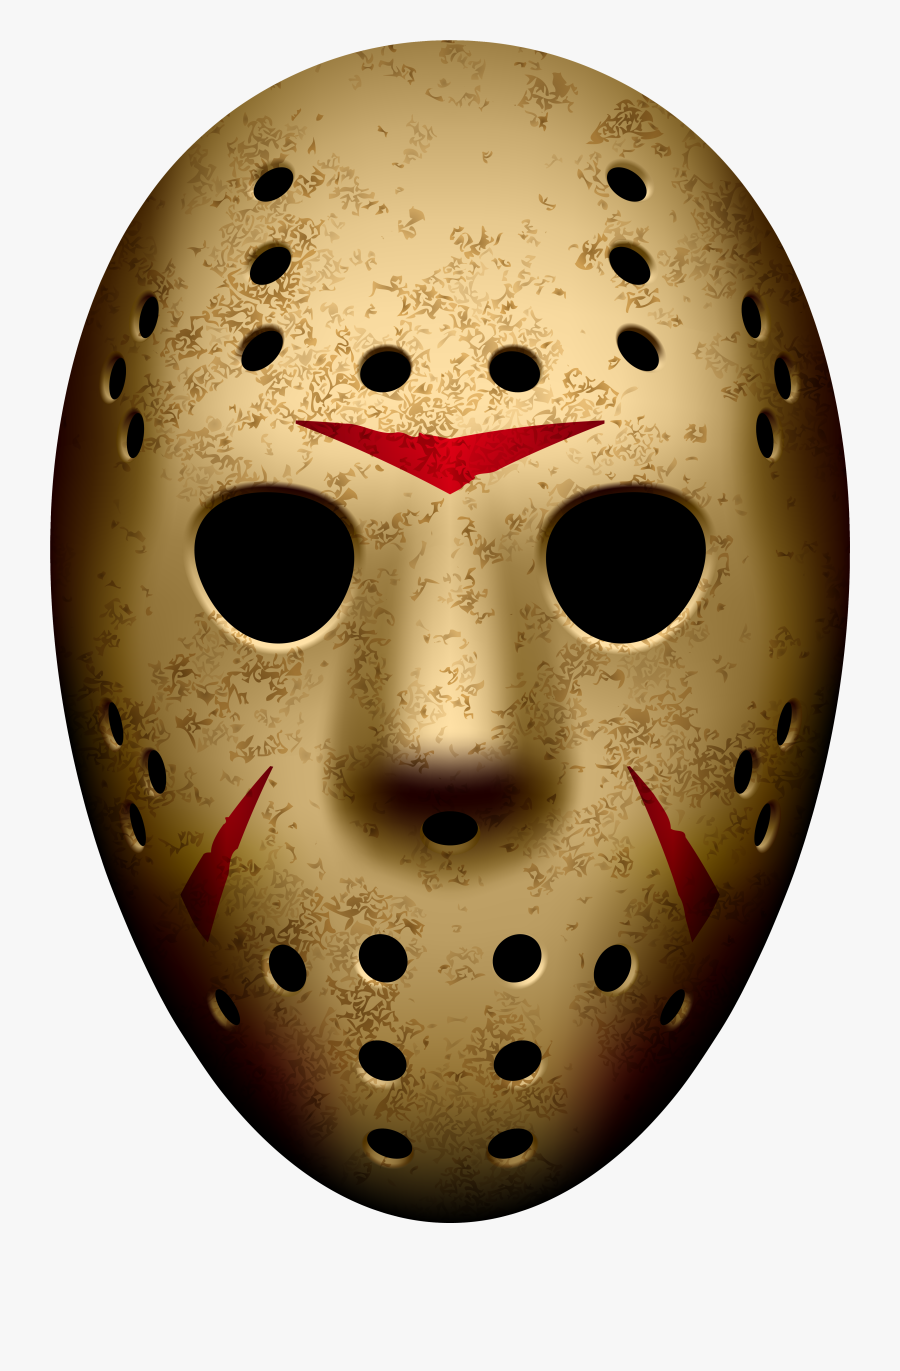 Jason Mask Friday The 13th Png Clip Art Image​ - Jason Voorhees Mask Png, Transparent Clipart